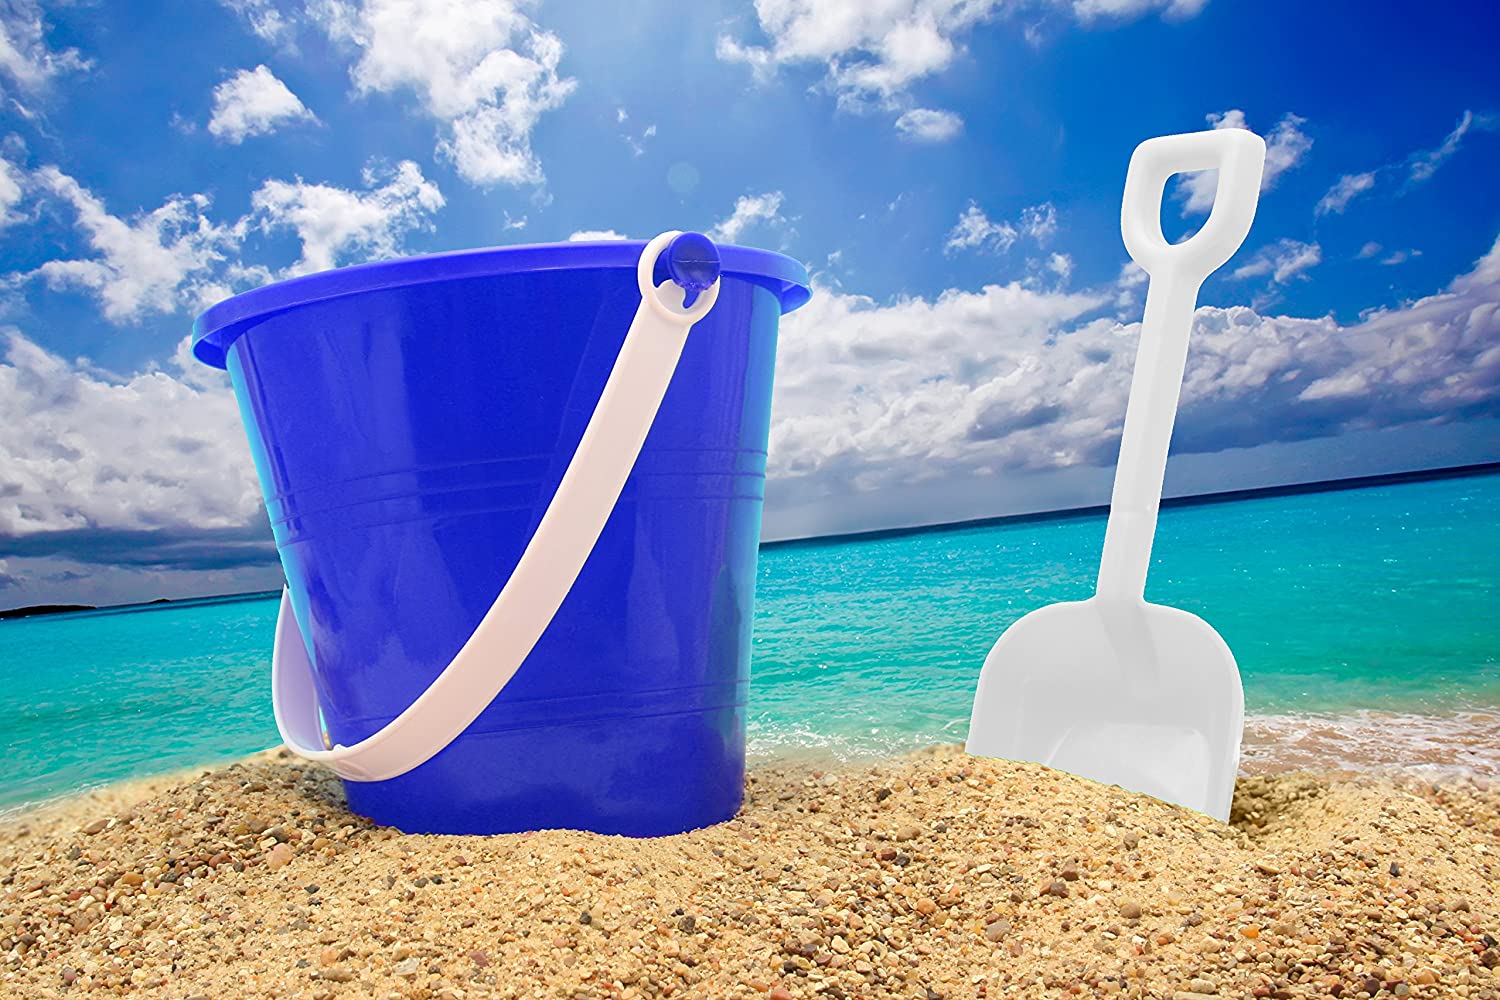 JoyX 5" Inch Beach Pails Sand Buckets and Sand Shovels Set for Kids | Beach and Sand Toys at The Beach | Use for Sand Molds at The Sandbox (Pack of 6 Sets) - image 5 of 7